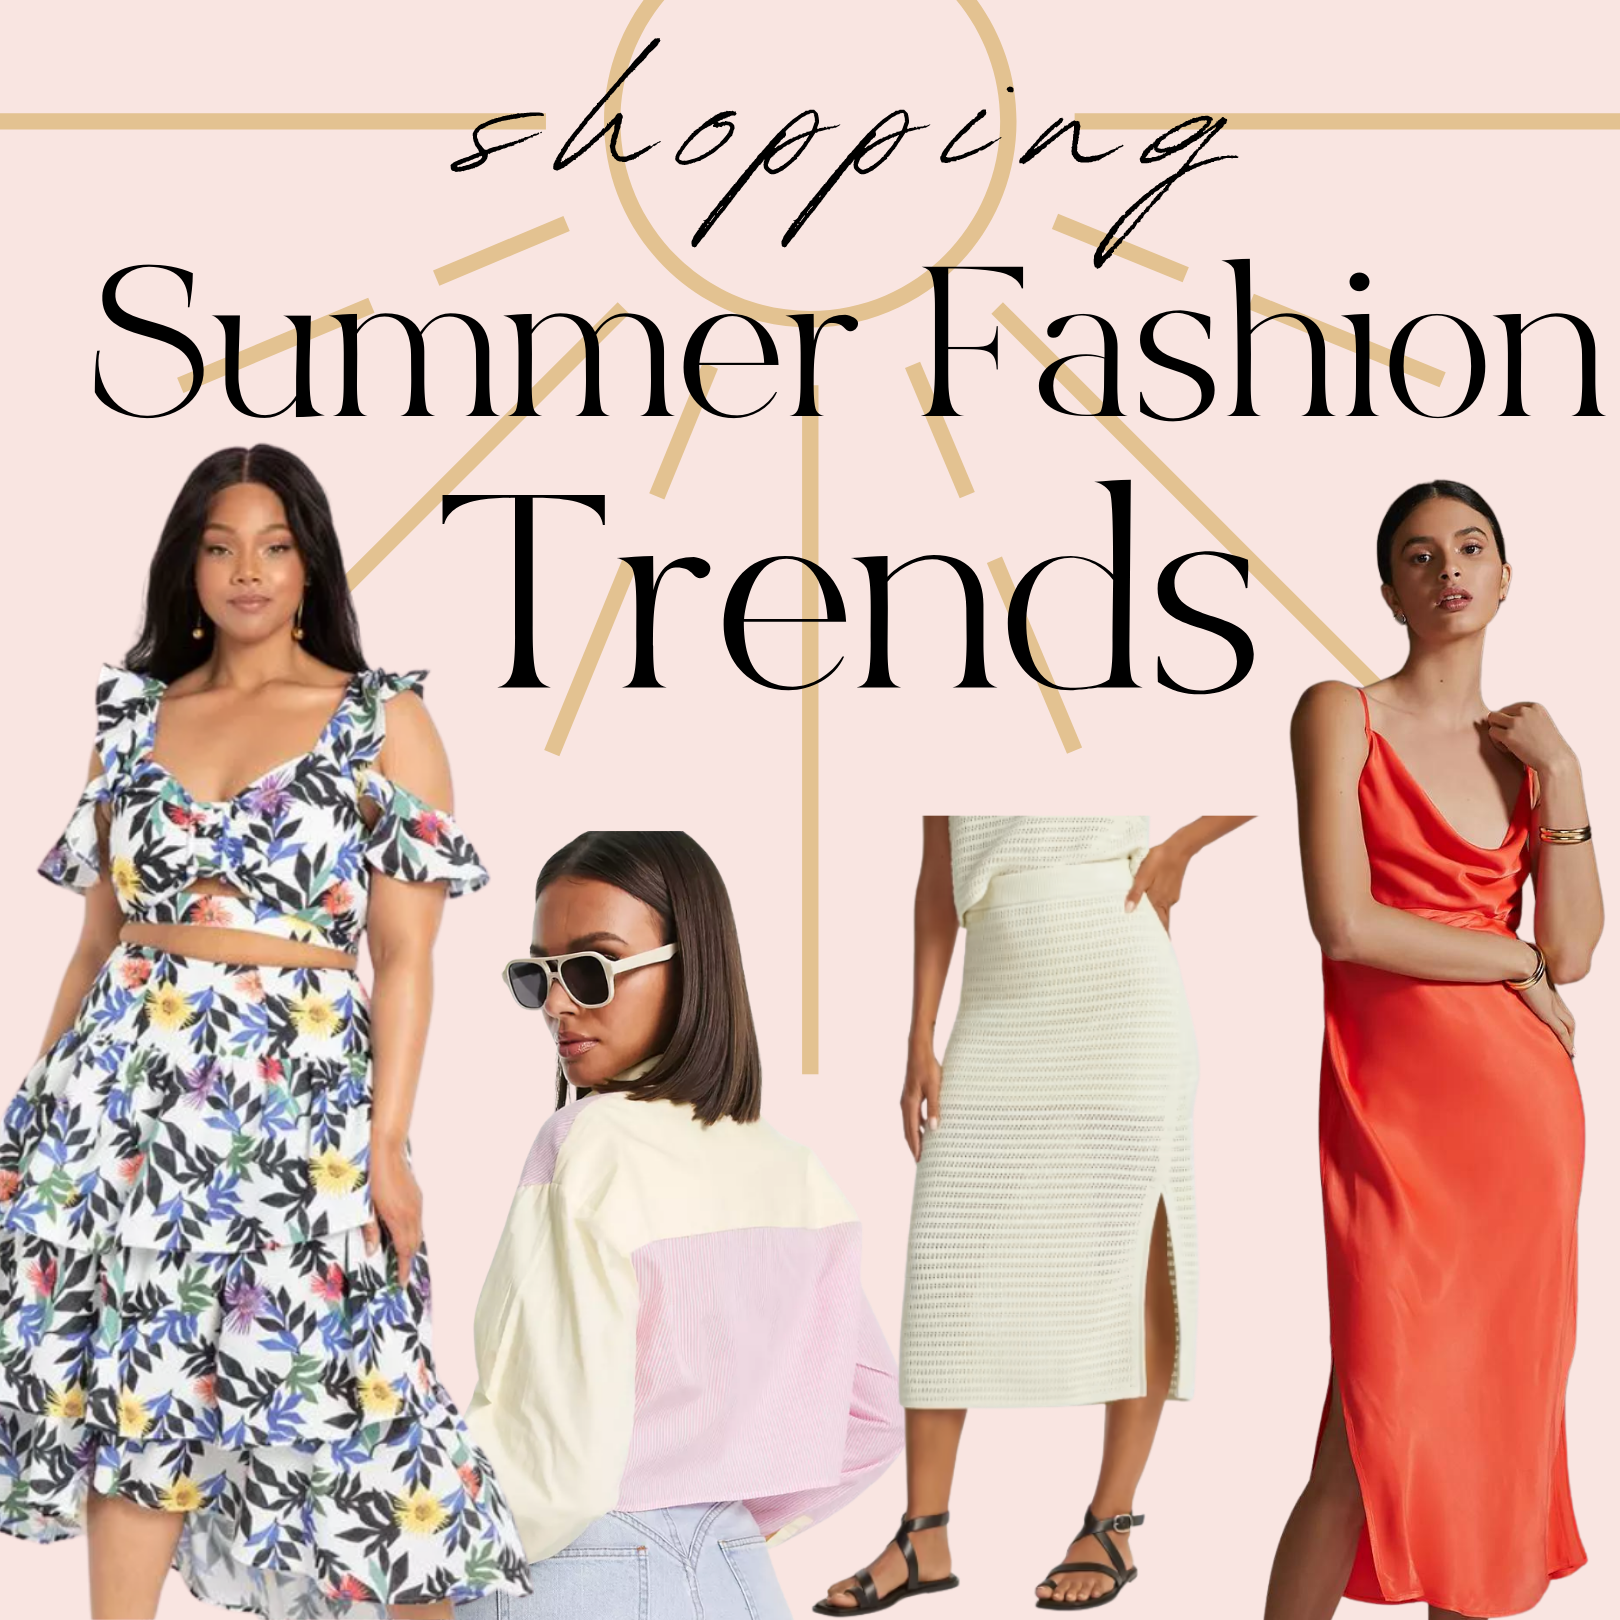 Summer 2022 Fashion Trends guide